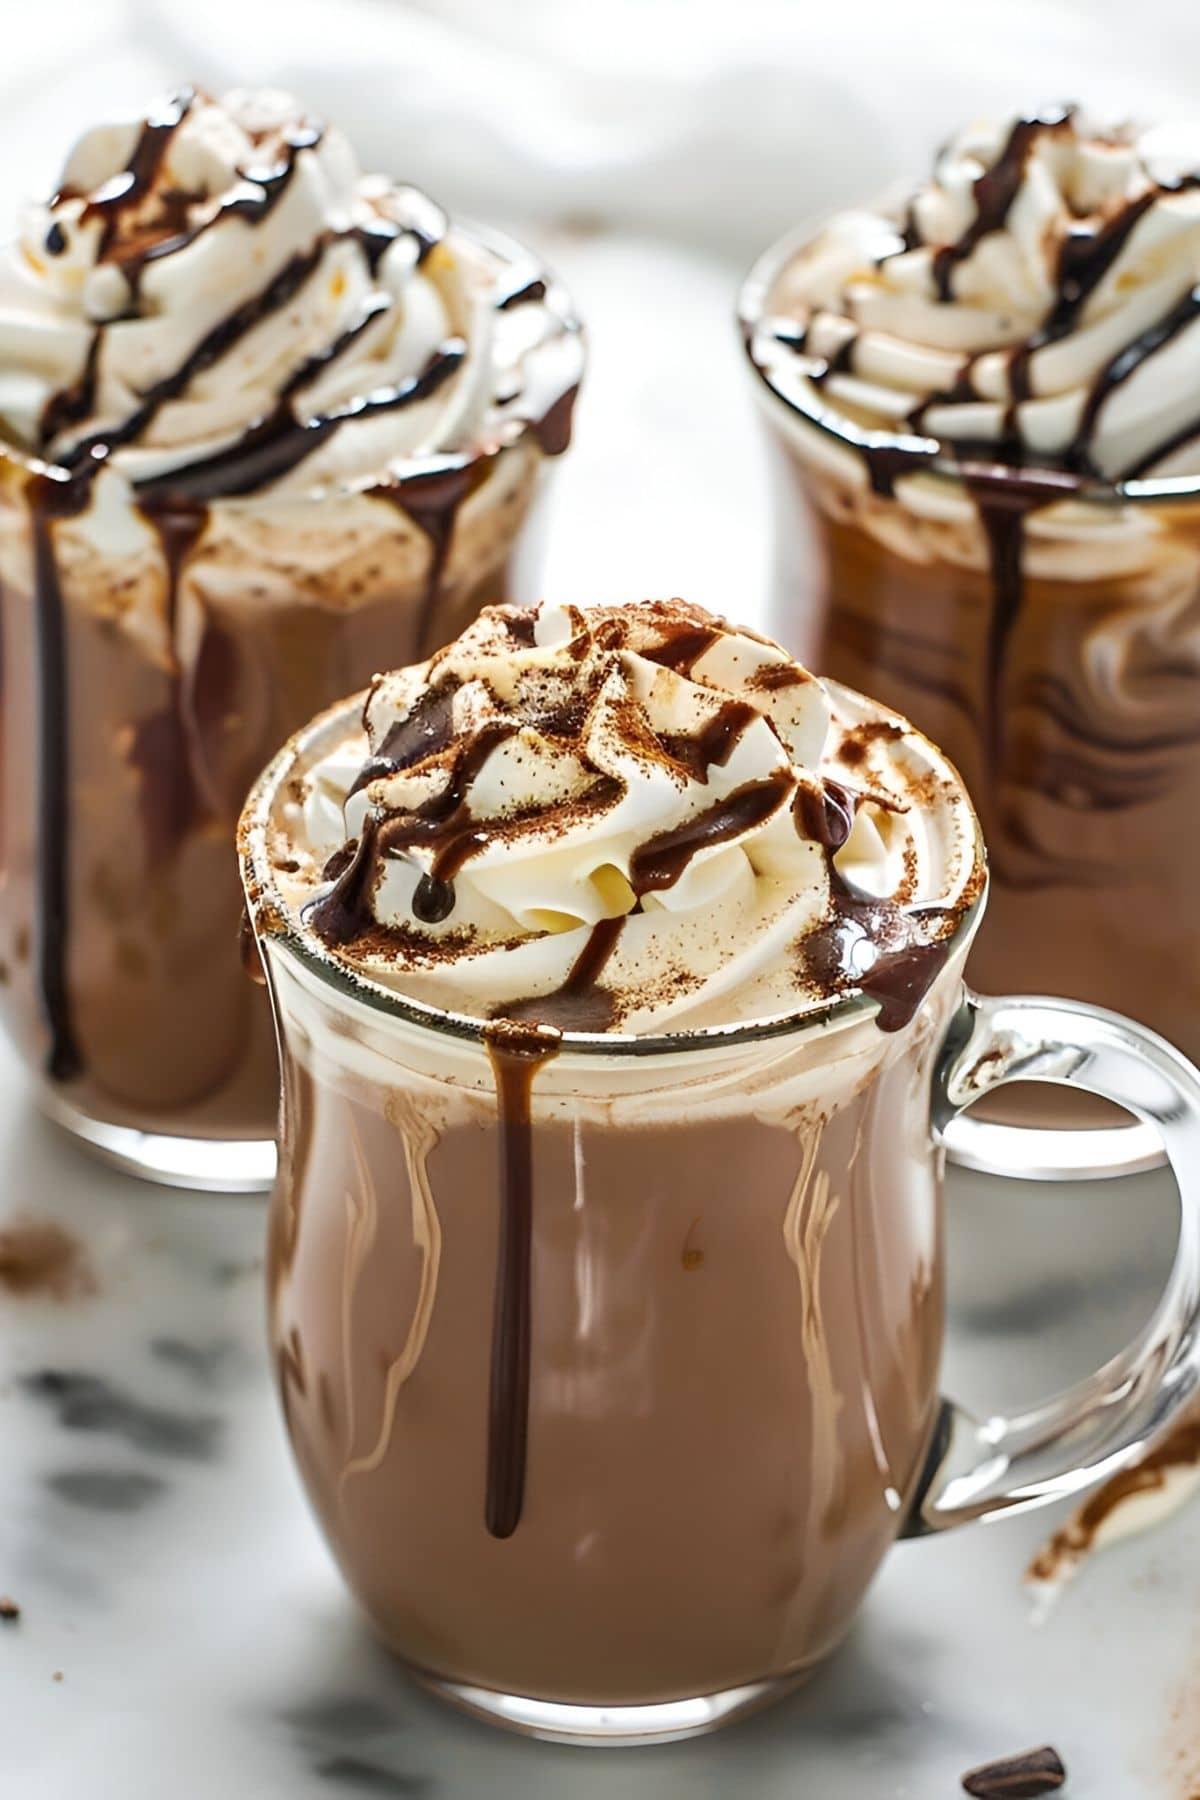 Three Glass Mugs of Bailey's Hot Cocoa with Whipped Cream, Chocolate Drizzle, and Cocoa Powder on a White Counter